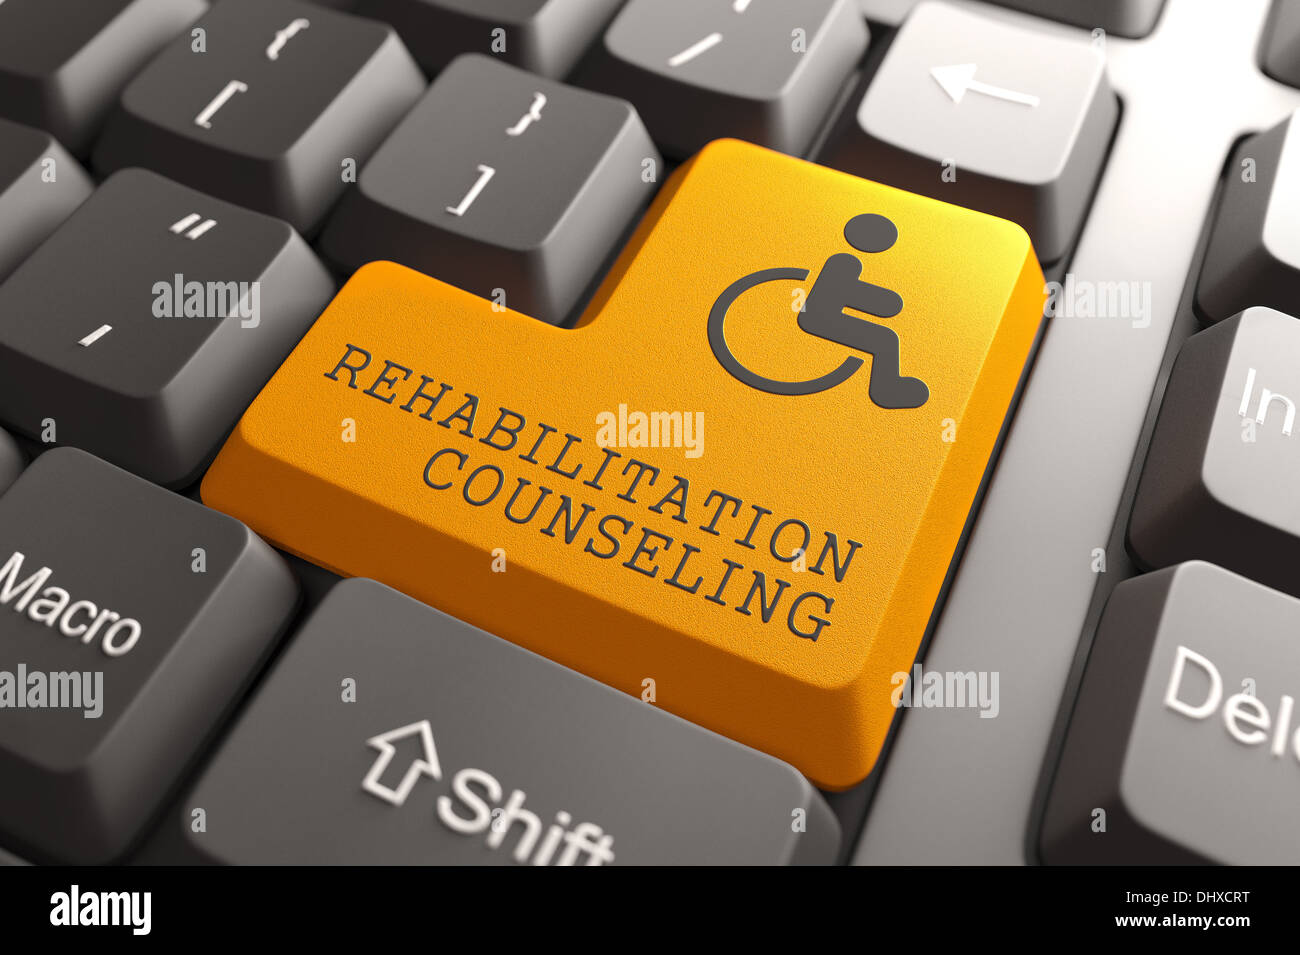 Rehabilitation Counseling for Disabled on Button. Stock Photo